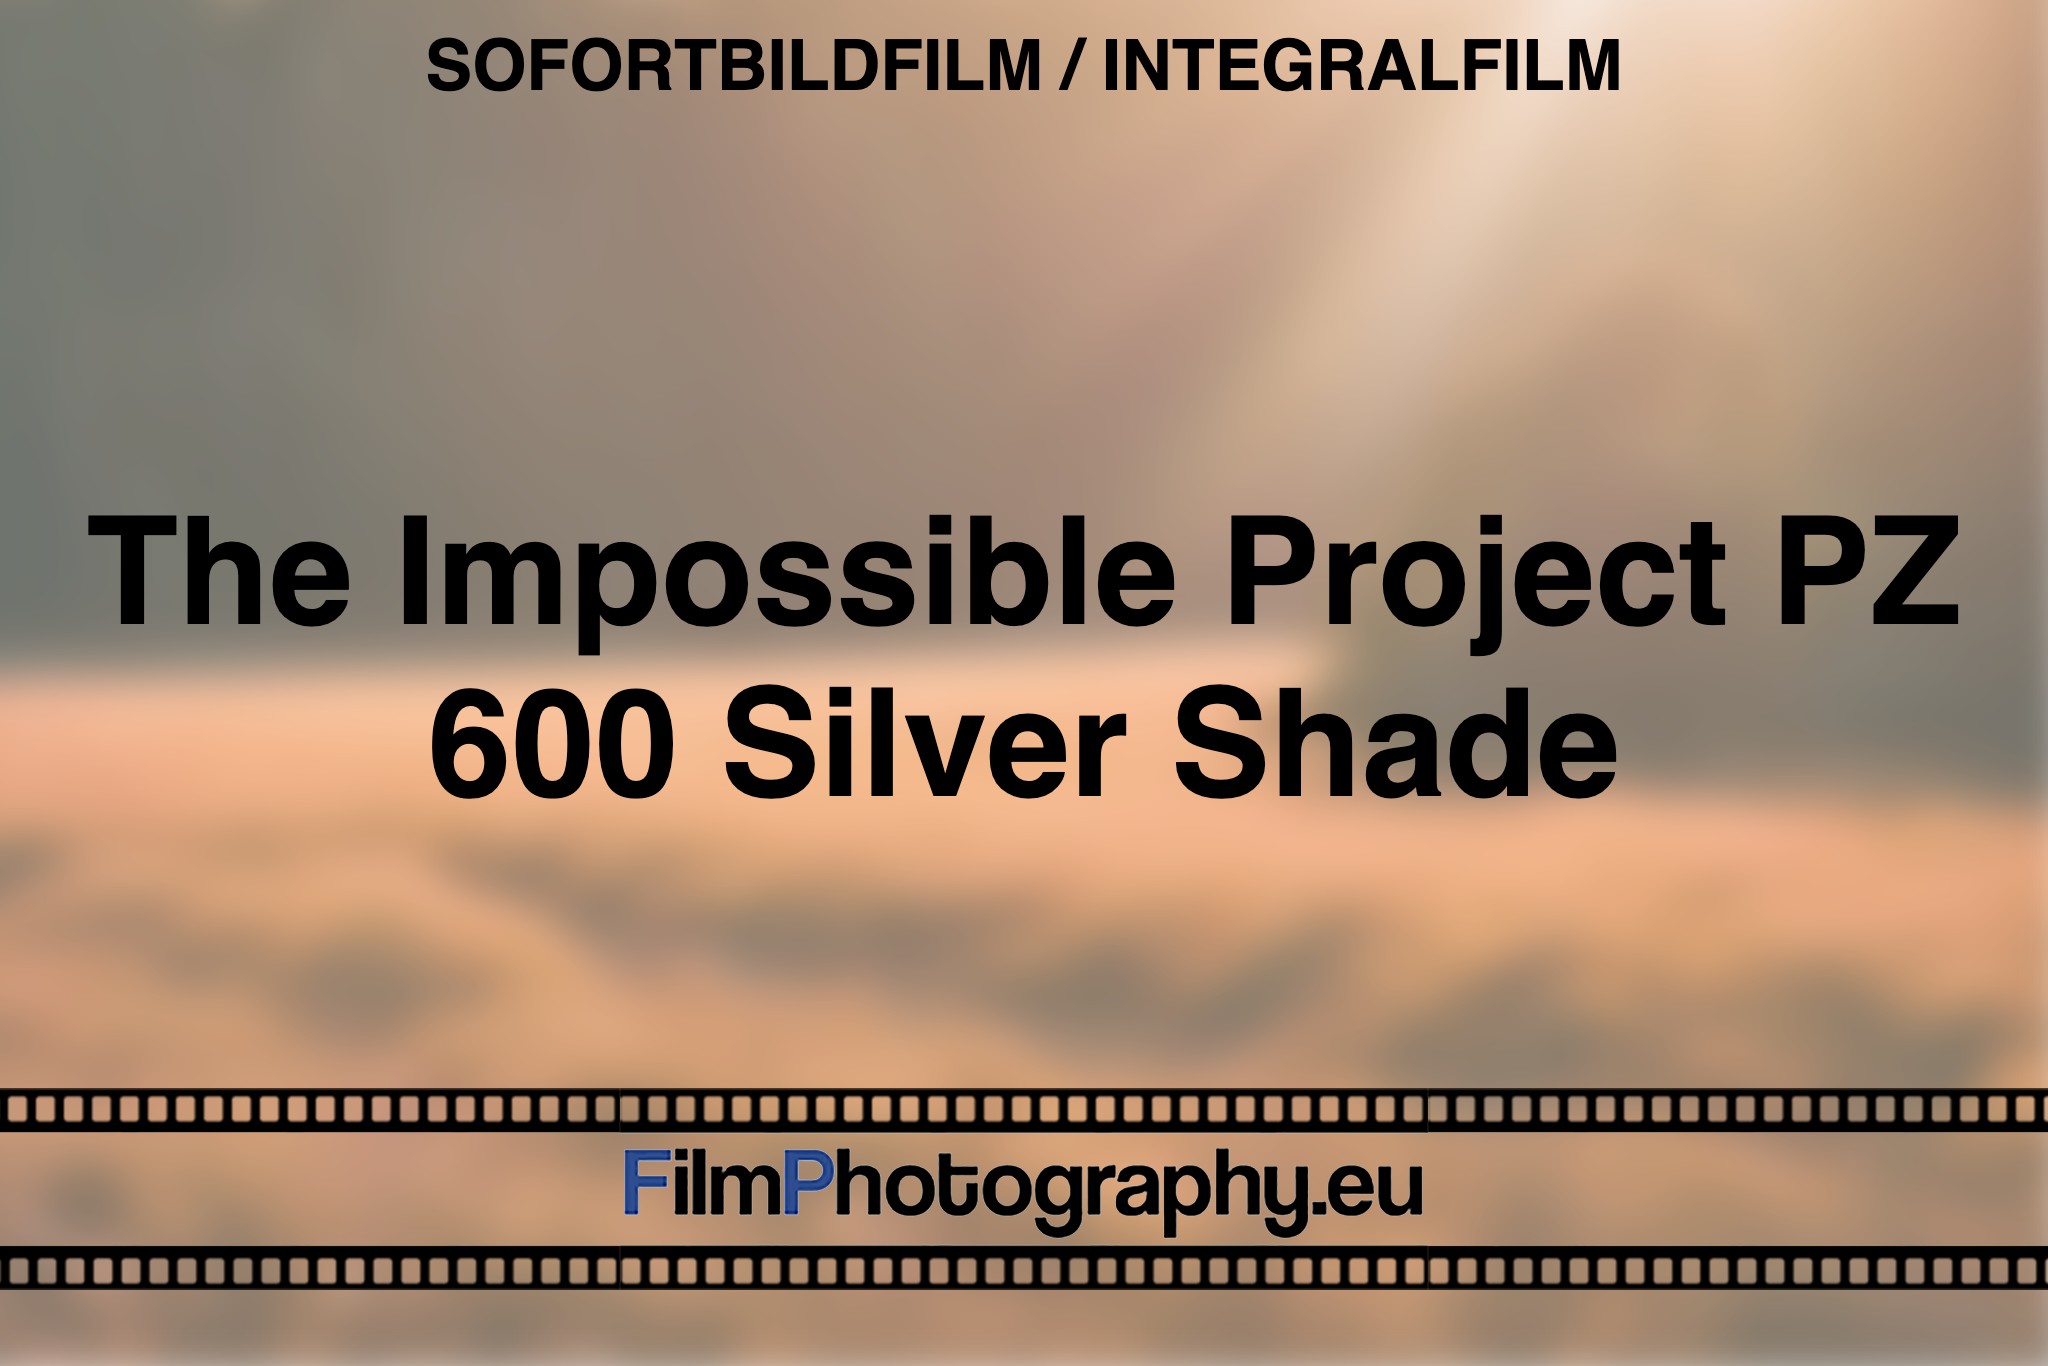 the-impossible-project-pz-600-silver-shade-sofortbildfilm-integralfilm-bnv